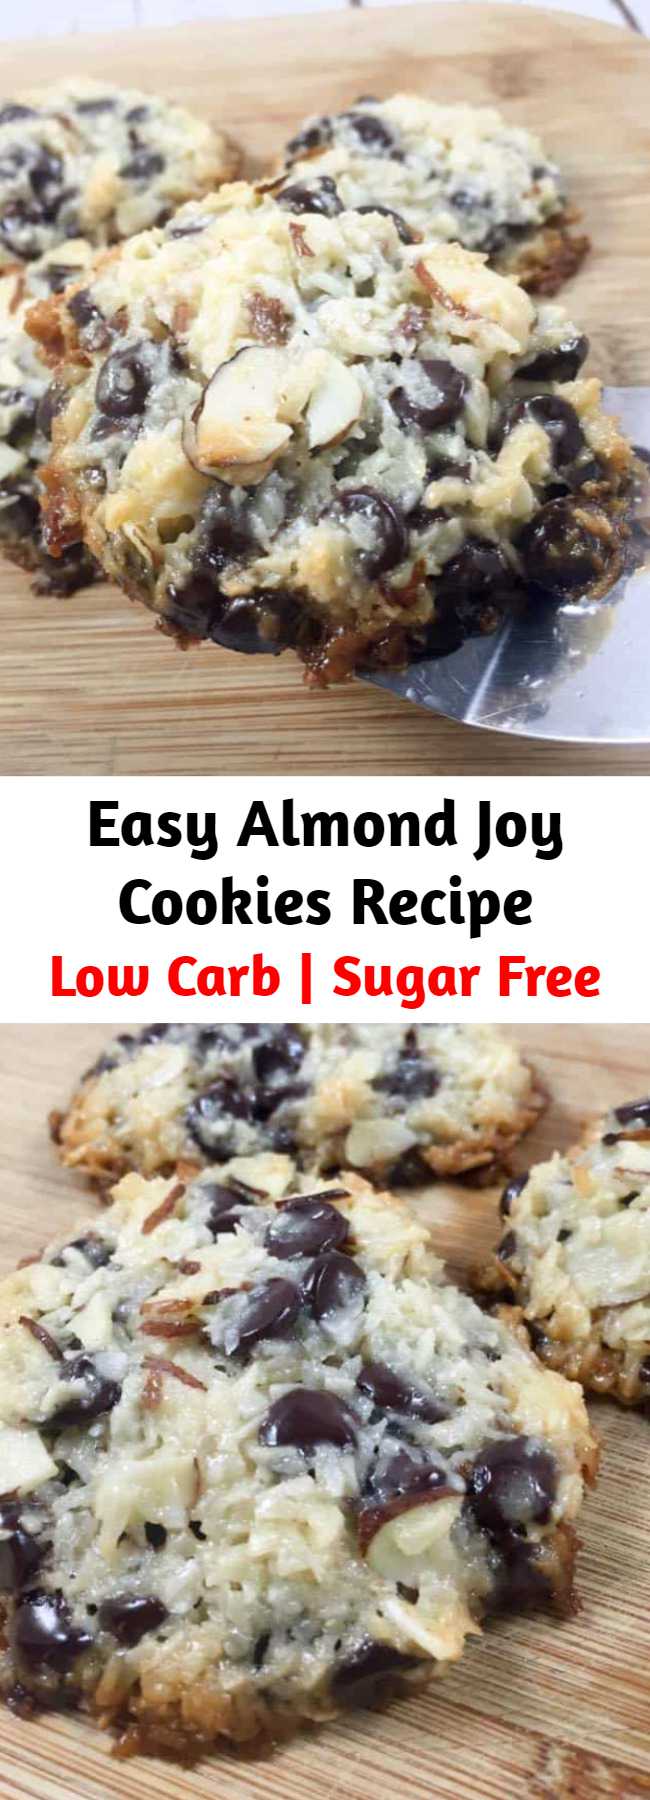 Super Easy Almond Joy Cookies Recipe - Keto Low Carb Almond Joy Cookies! These Almond Joy Cookies only have 4 ingredients and are everything you’ve dreamed of in a low carb chocolate chip coconut cookie. Filled with coconut, stevia-sweetened chocolate chips, almonds, and homemade (sugar free) low carb sweetened condensed milk, you’ll want to make these again and again!